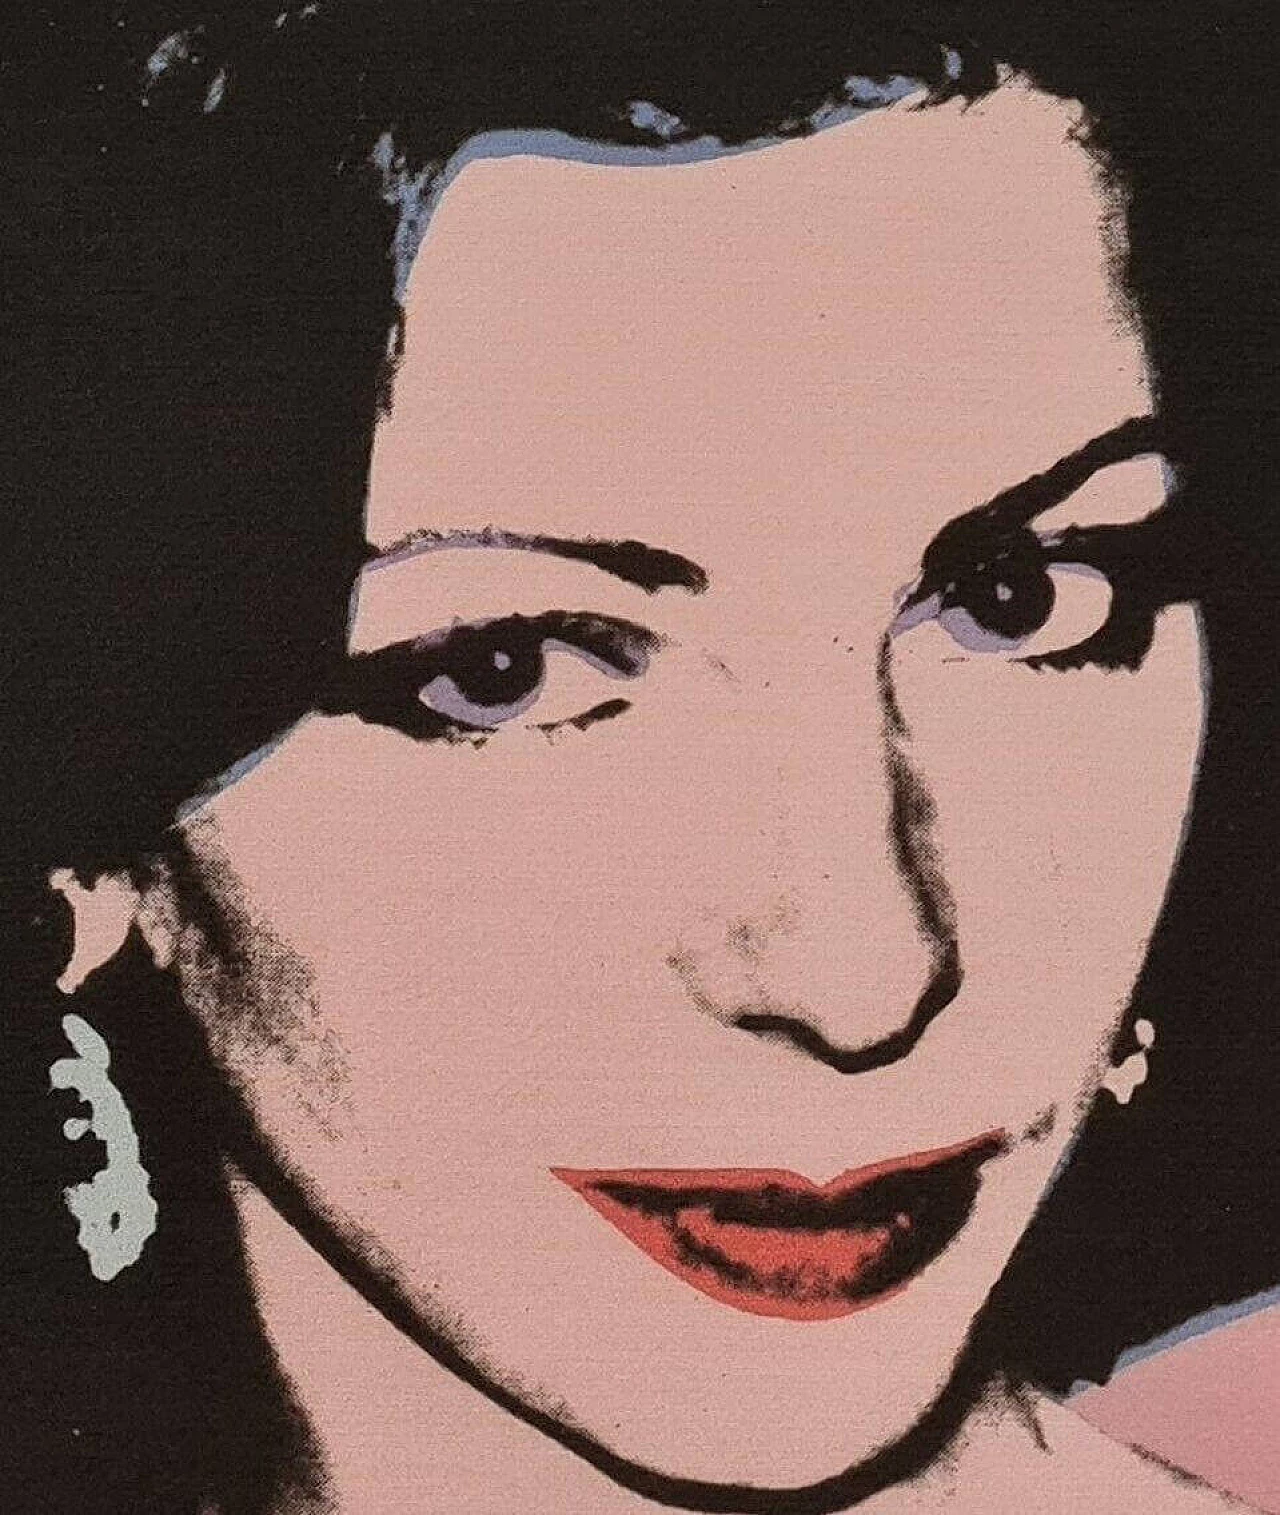 Female portrait, lithography, reproduction after Andy Warhol, 1980s 8